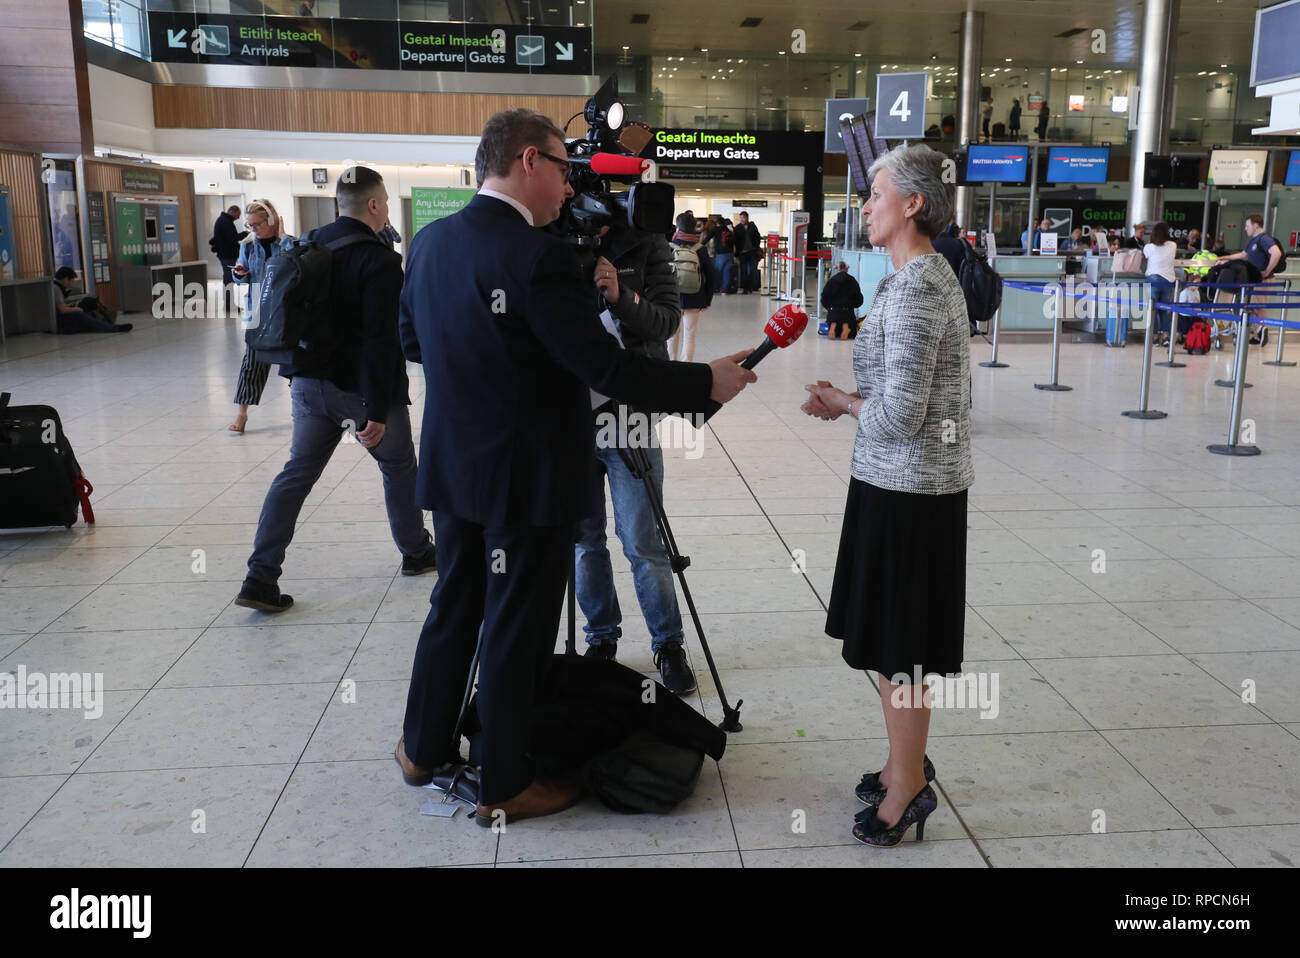 Siobhan O'Donnell, spokeswoman for Dublin Airport, speaking to the media in Terminal 1 after a confirmed drone sighting forced the temporary suspension of airport operations. Stock Photo